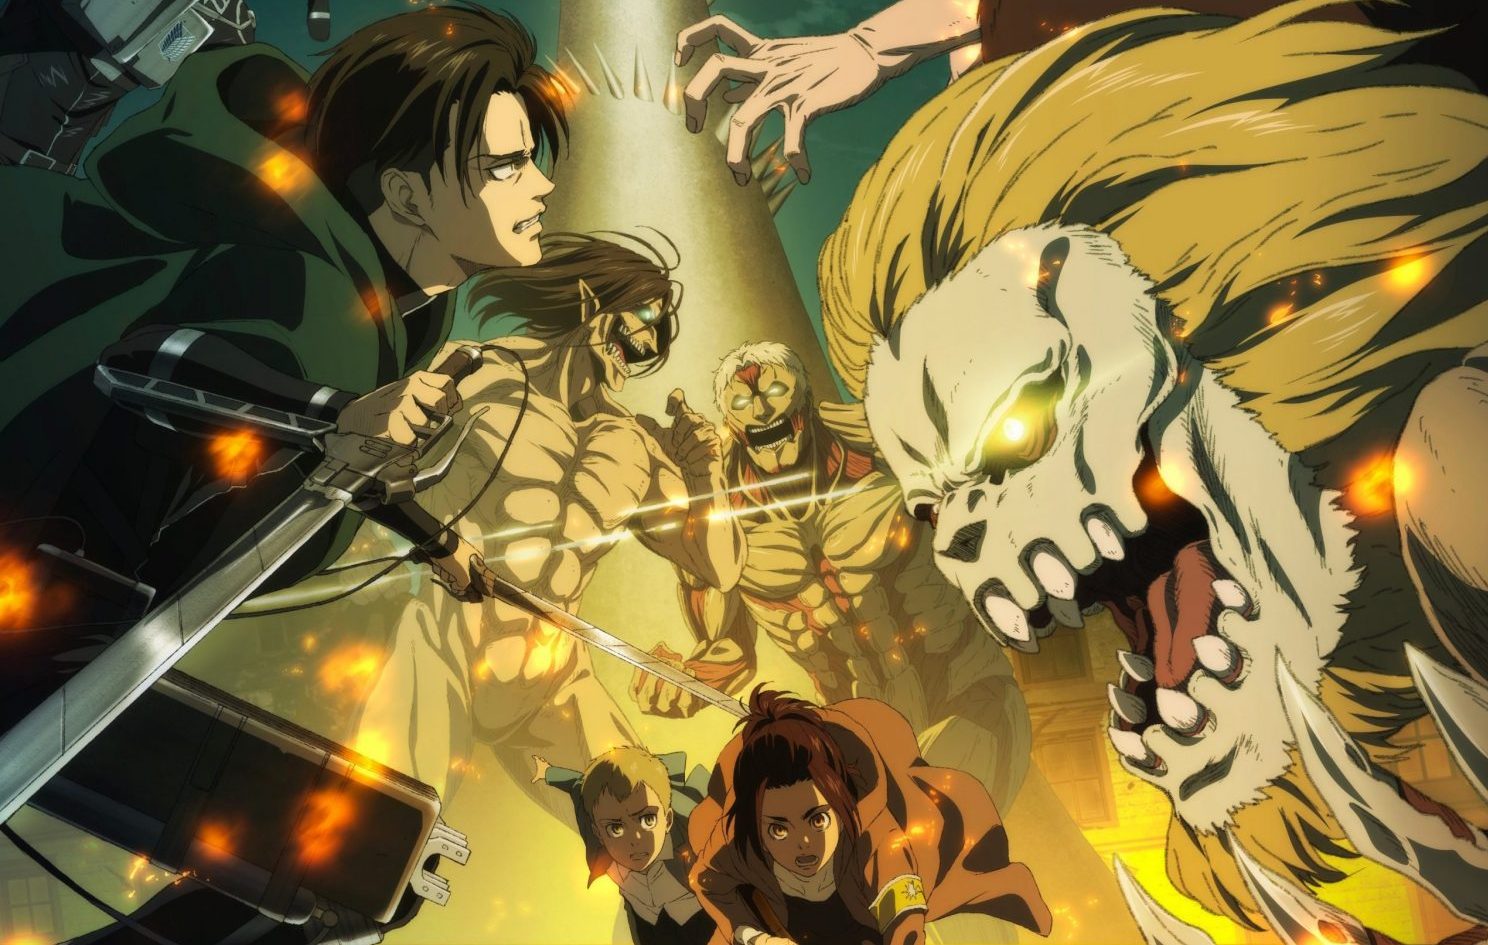 All ATTACK TITANS in History EXPLAINED - Ancient Titans, Shingeki No  Kyojin